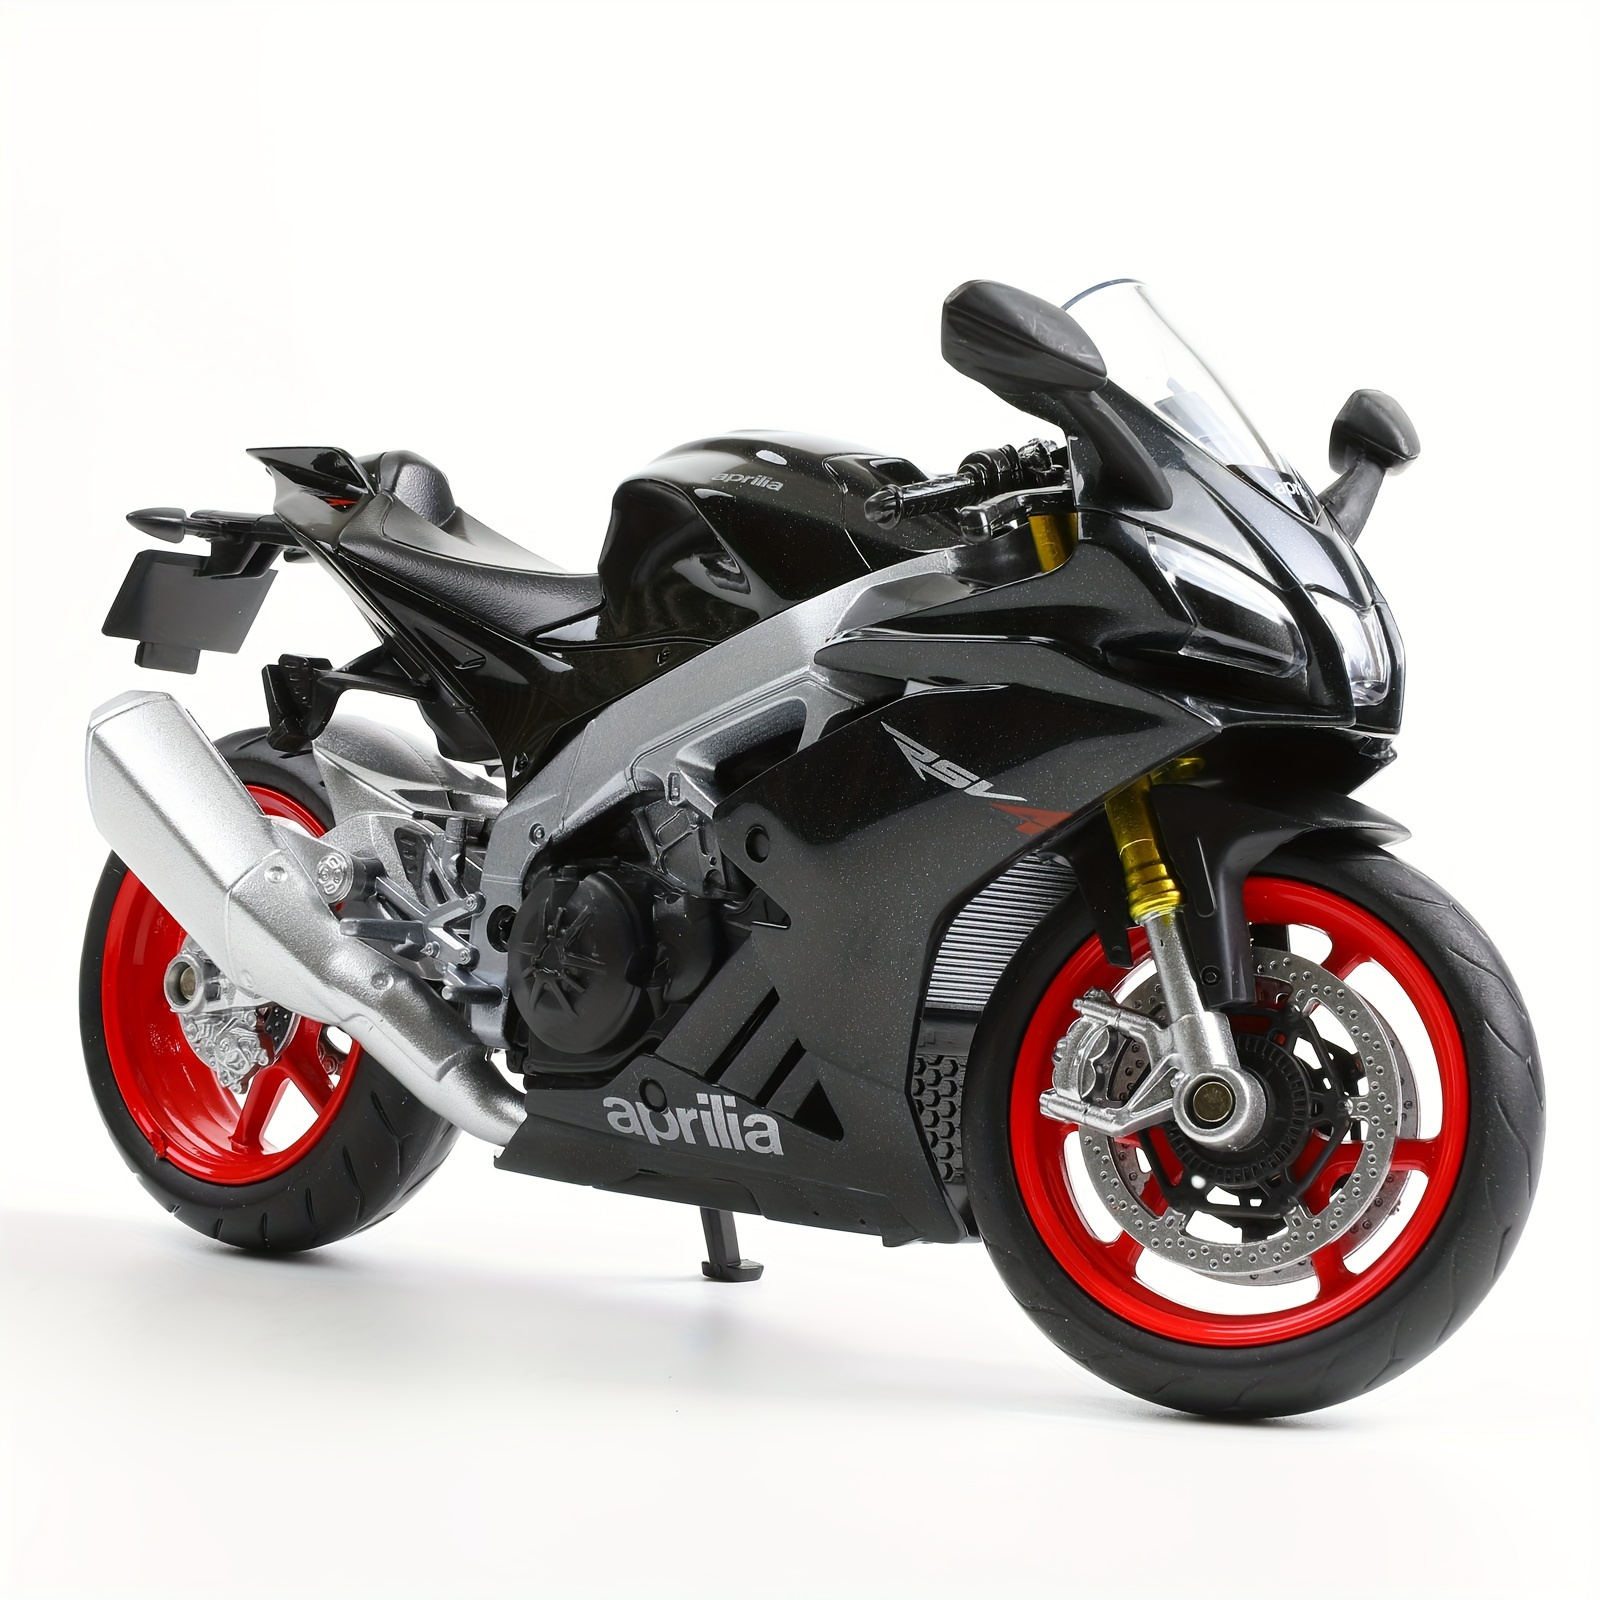 

Motorcycle Model, Aprilia Rsv4 Rr1000, Motorcycle Metal Model, 1:12 Scale Moto Toy Or Collection, Gift